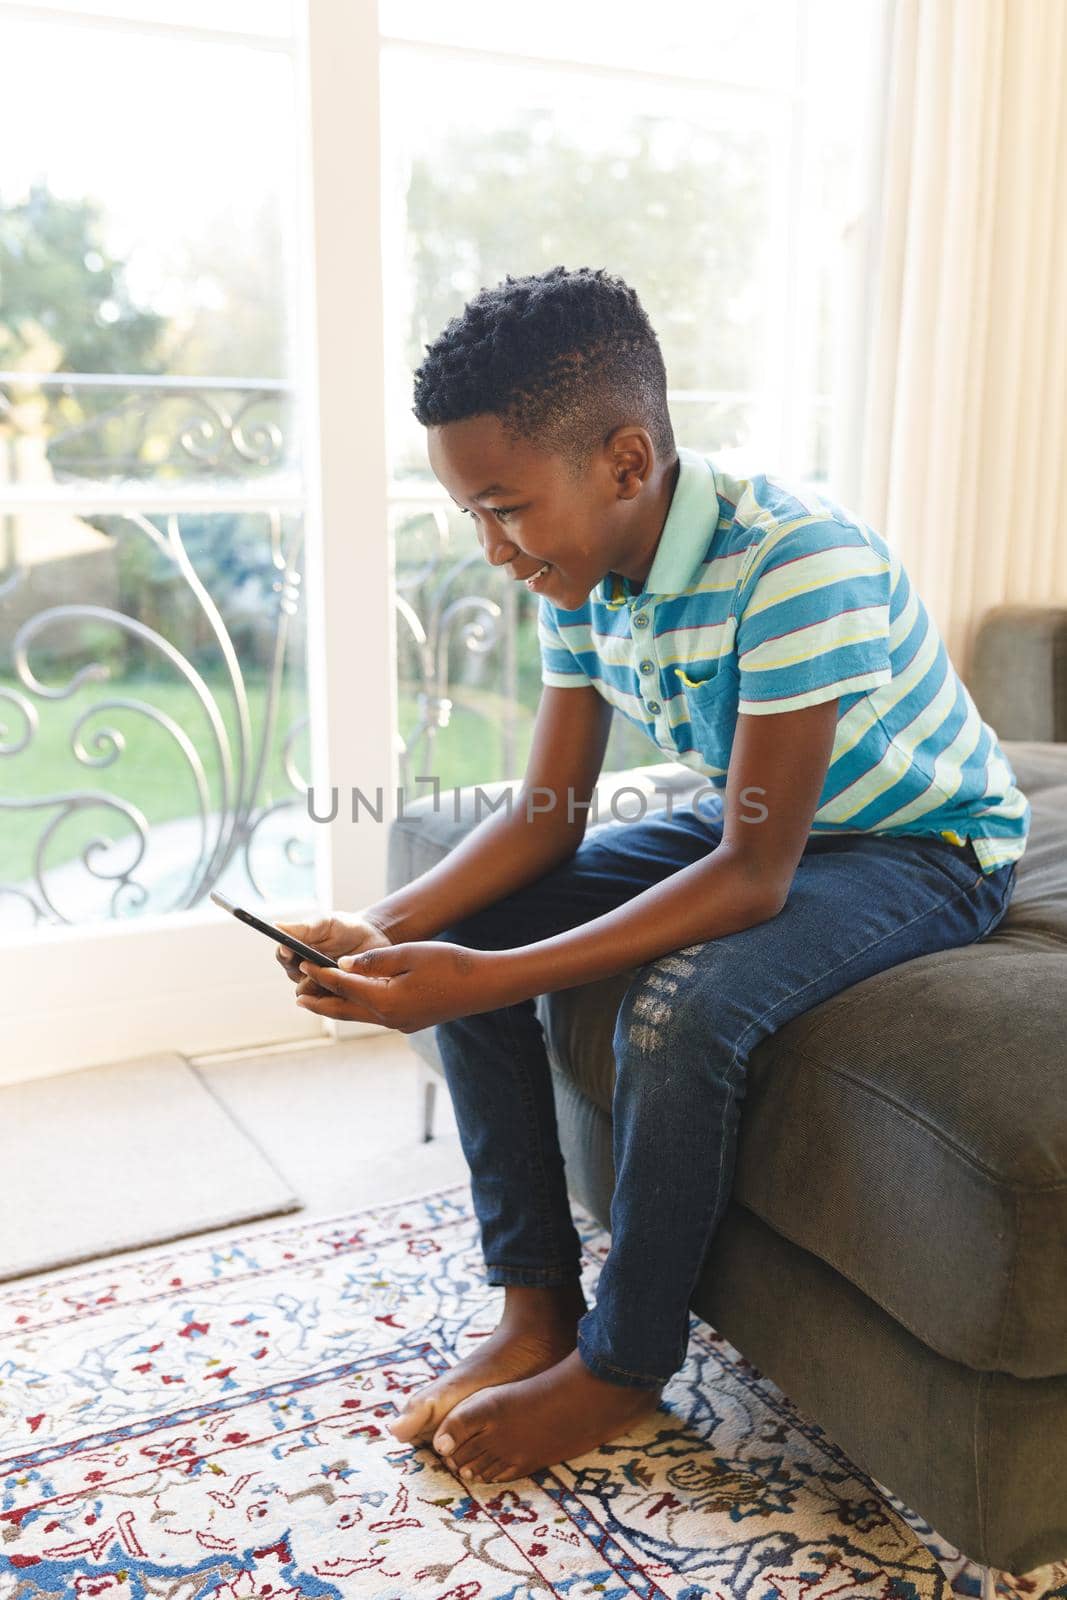 Happy african american boy using smartphone and sitting on couch in living room. spending time alone with technology at home.